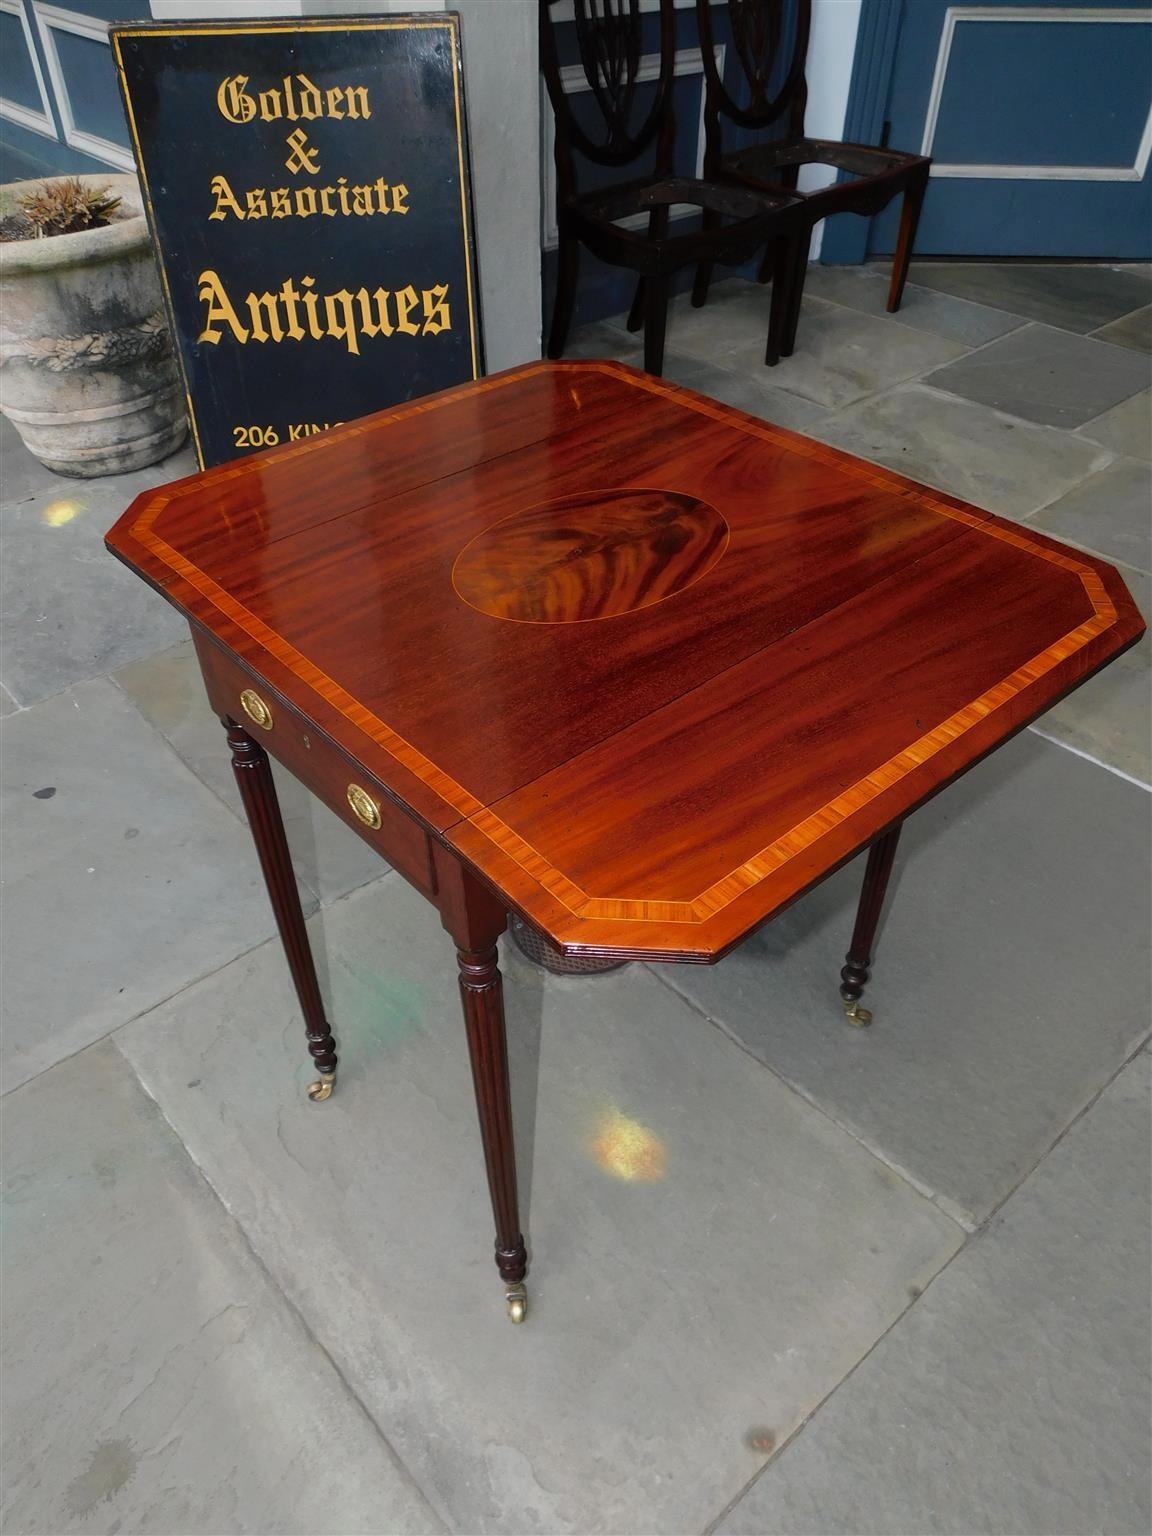 Early 19th Century English Regency Mahogany Tulip Inlaid Pembroke Table with Reeded Legs, C. 1800